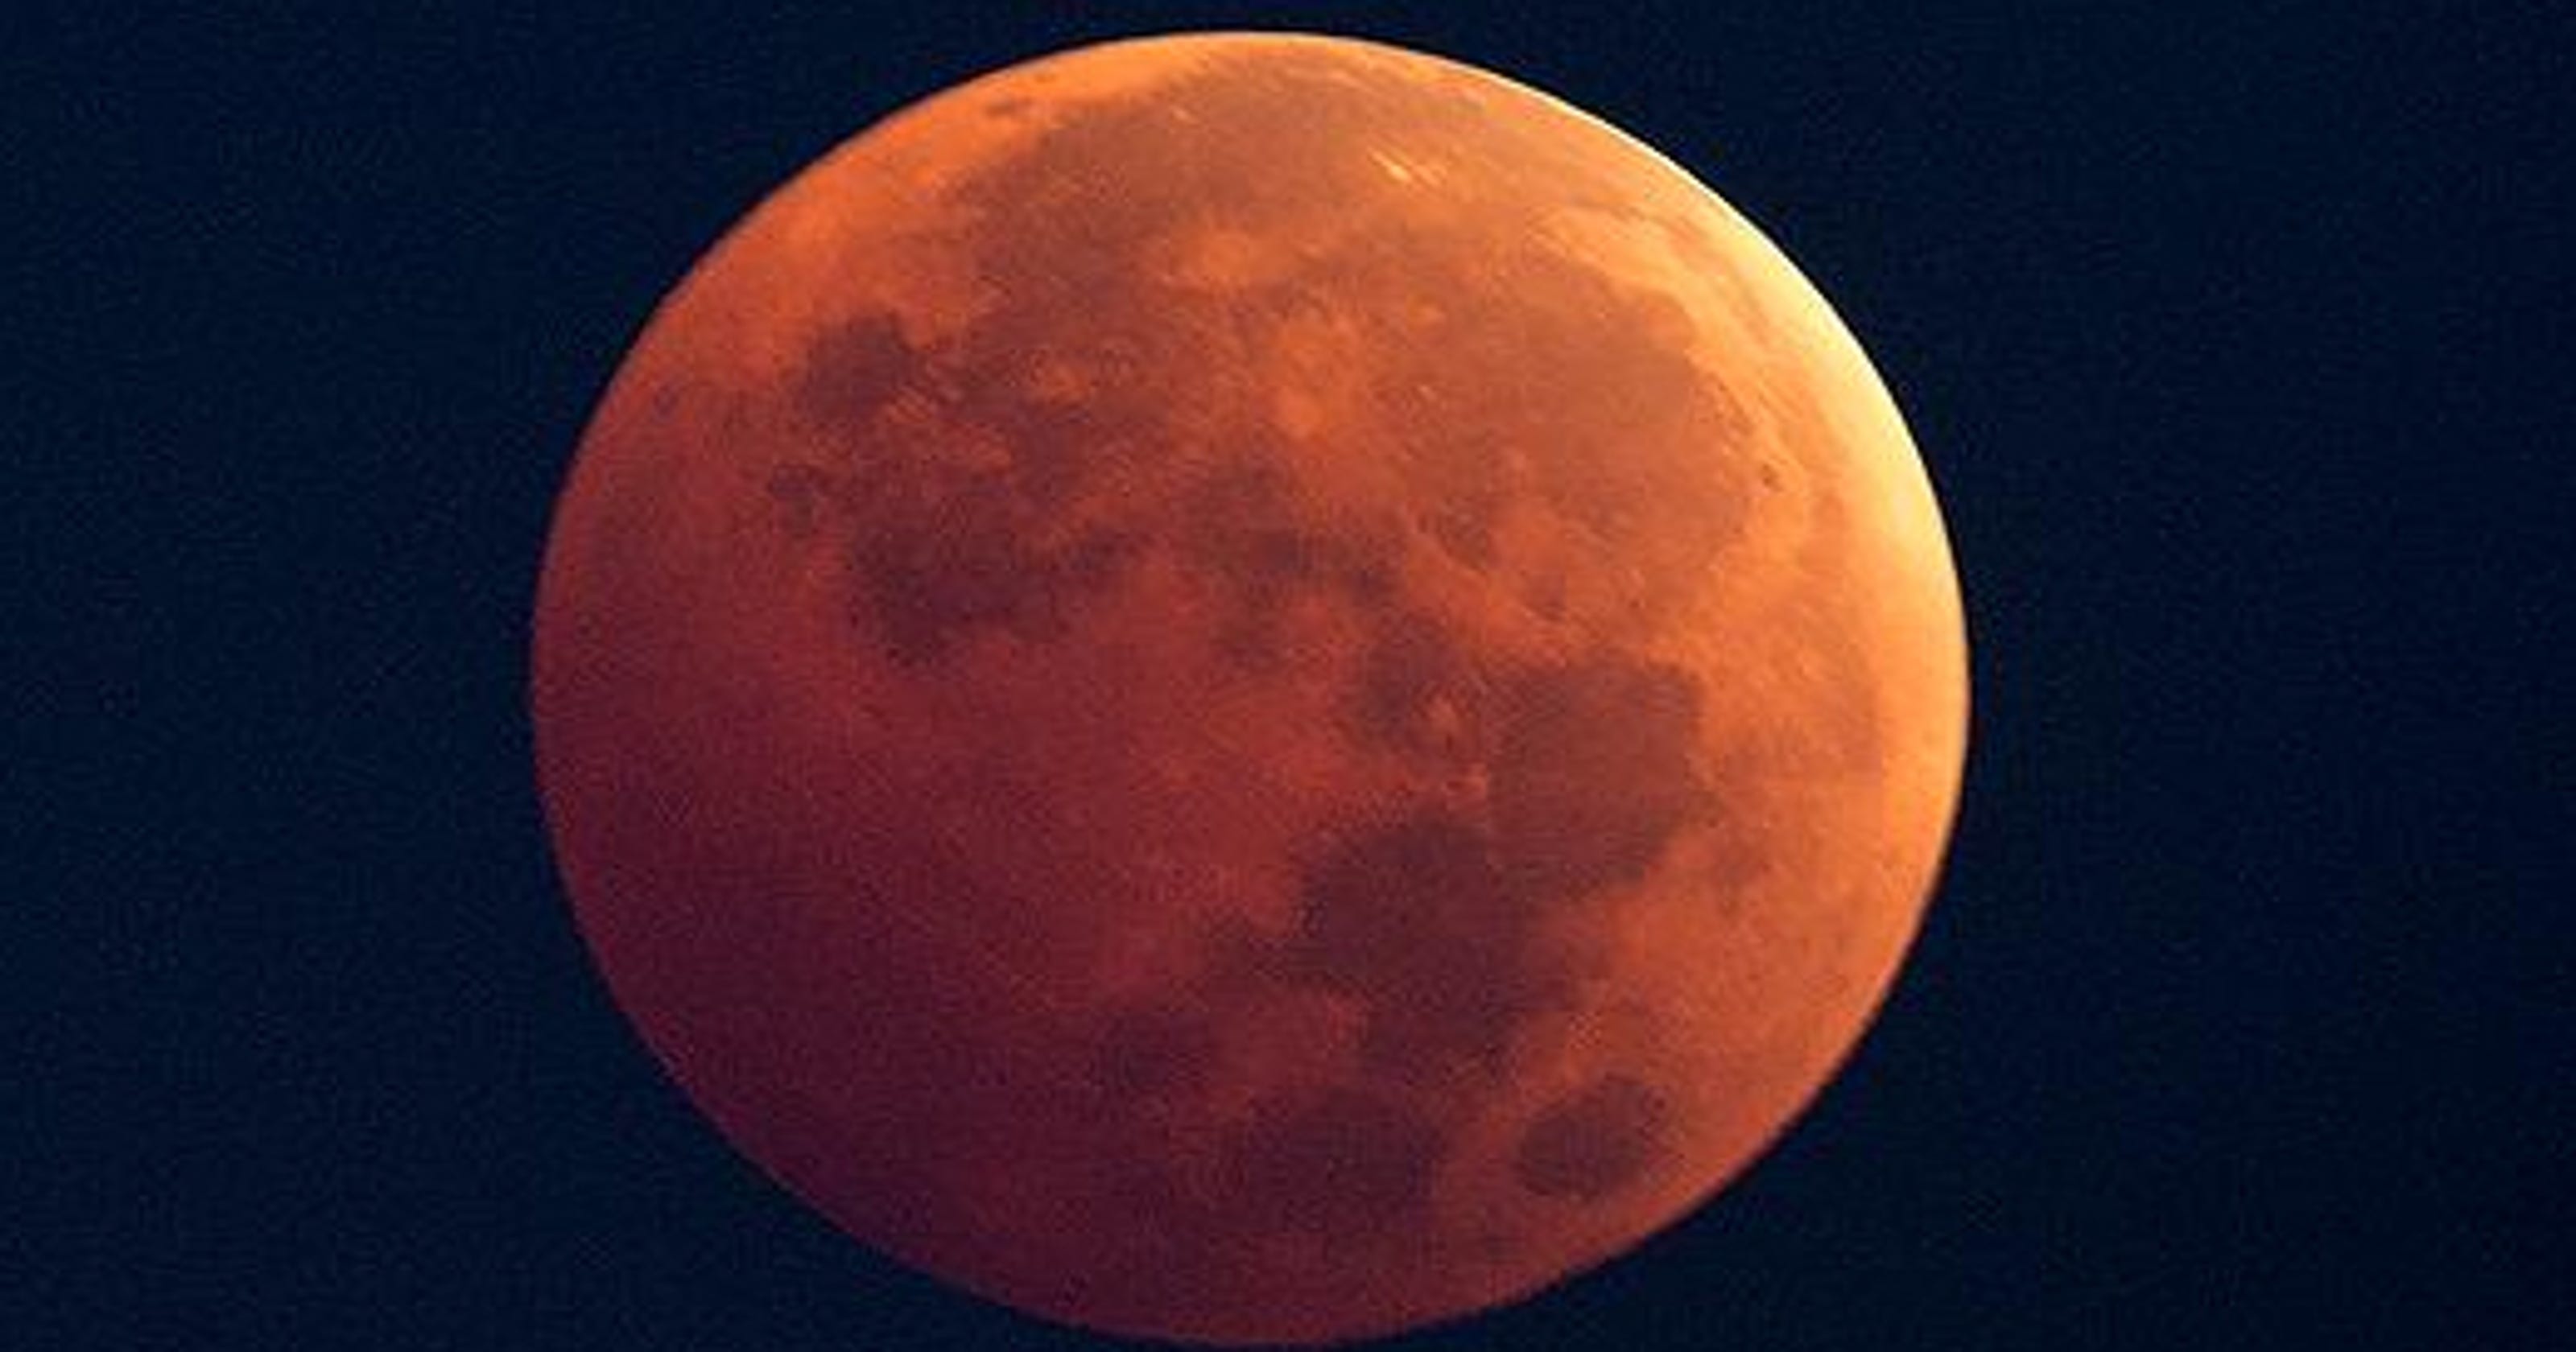 What you need to know about the supermoon lunar eclipse